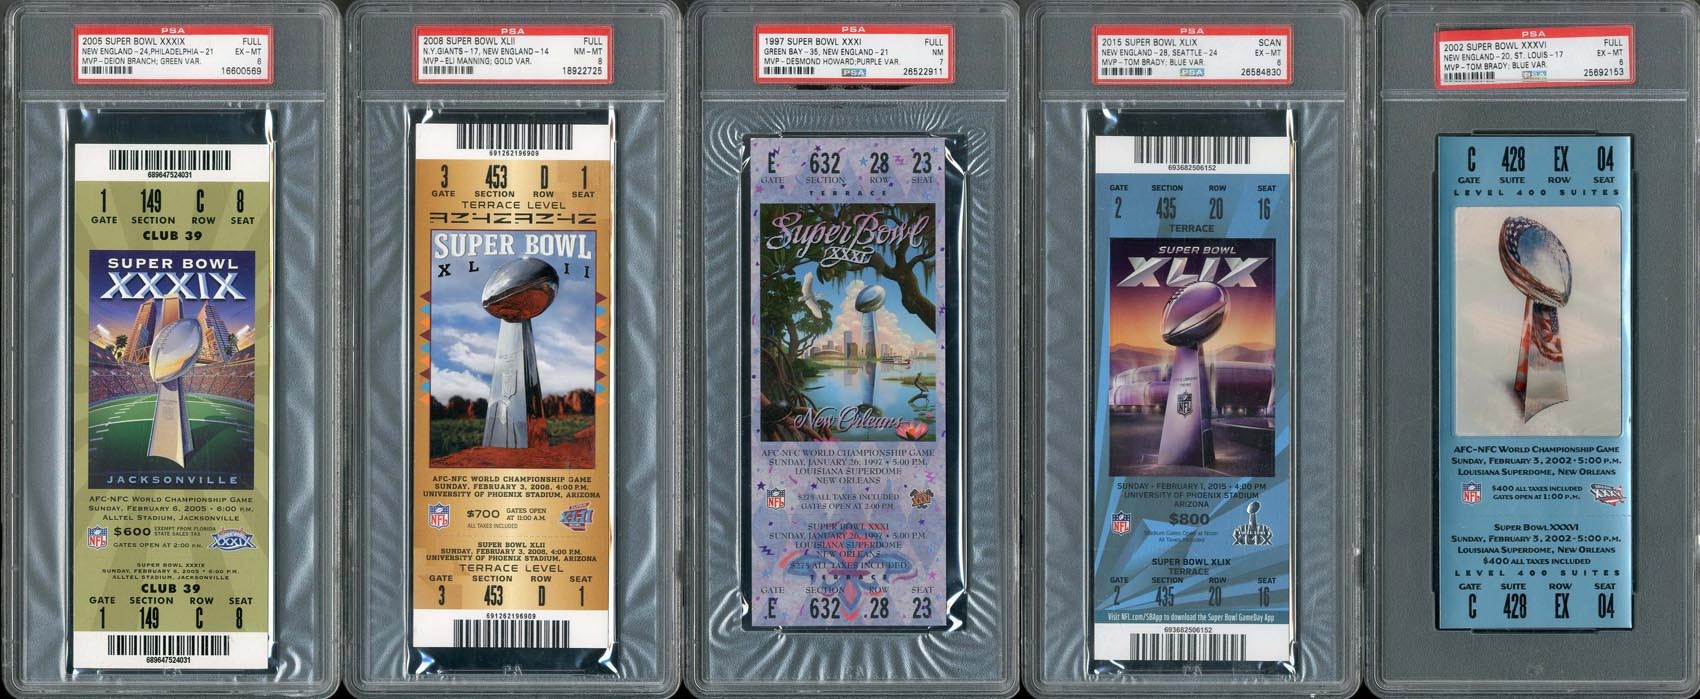 Every New England Patriots Super Bowl Appearance Ticket Collection (Some PSA Graded)